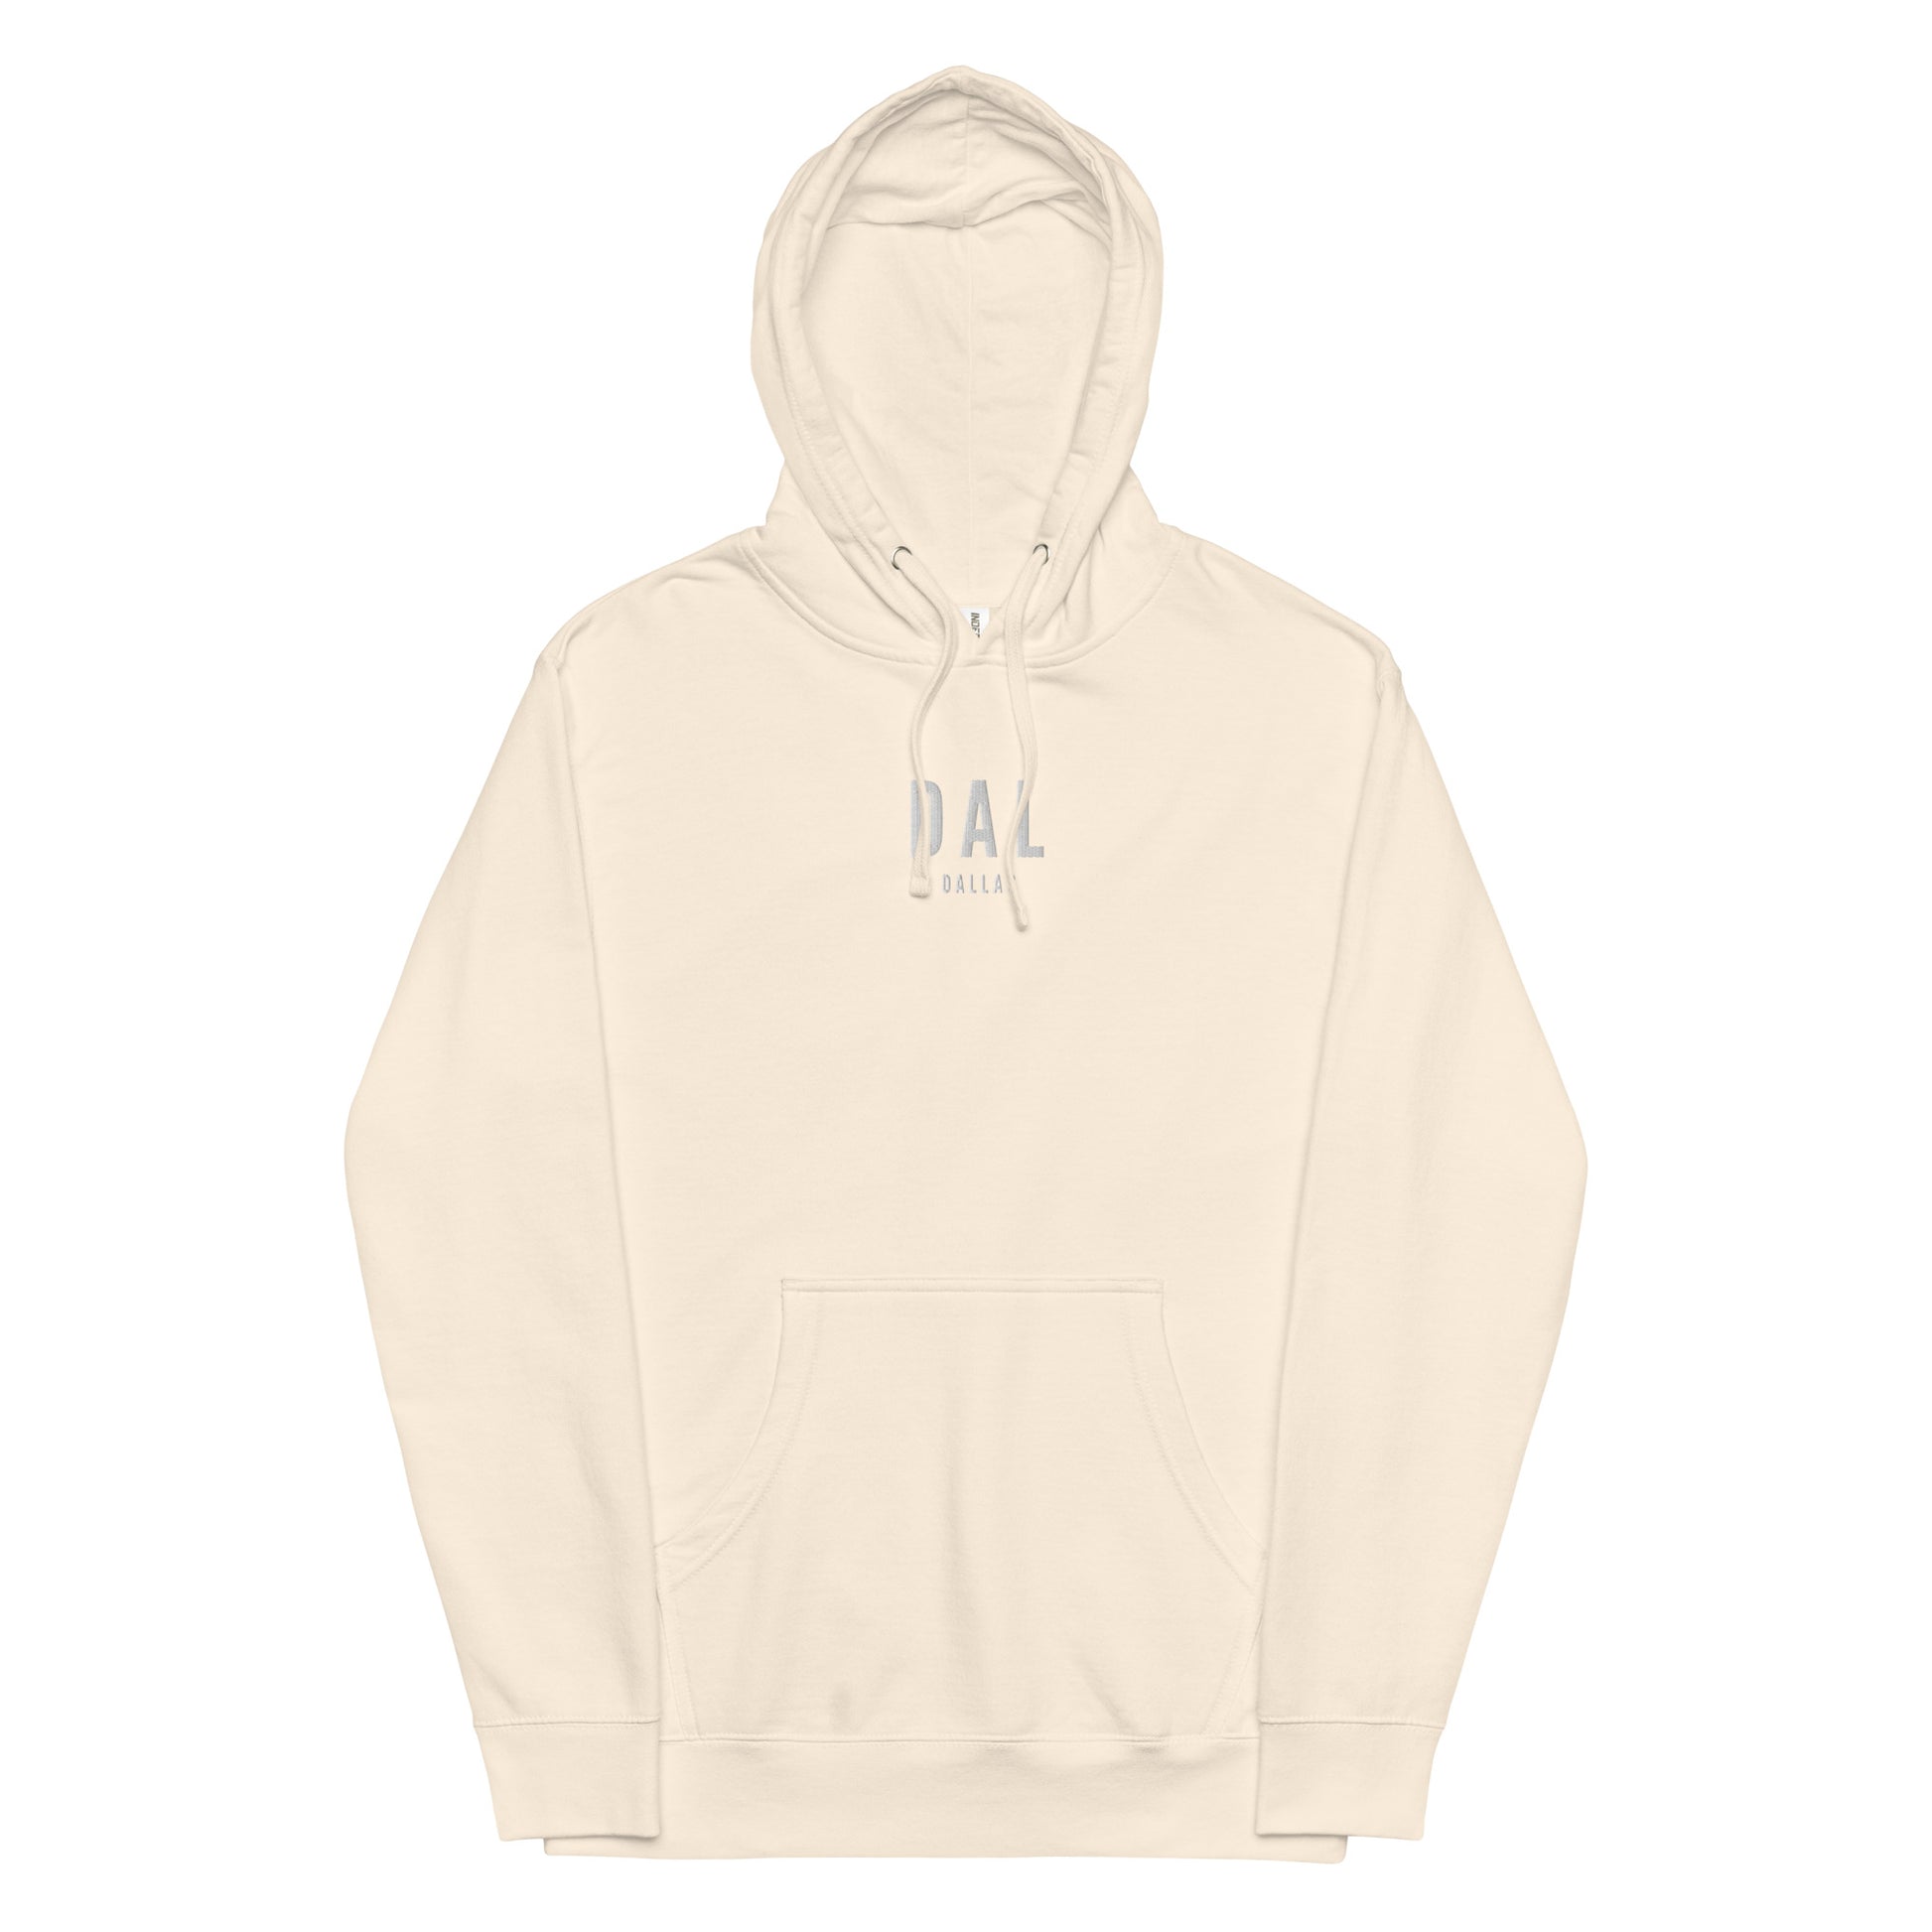 City Midweight Hoodie - White • DAL Dallas • YHM Designs - Image 17